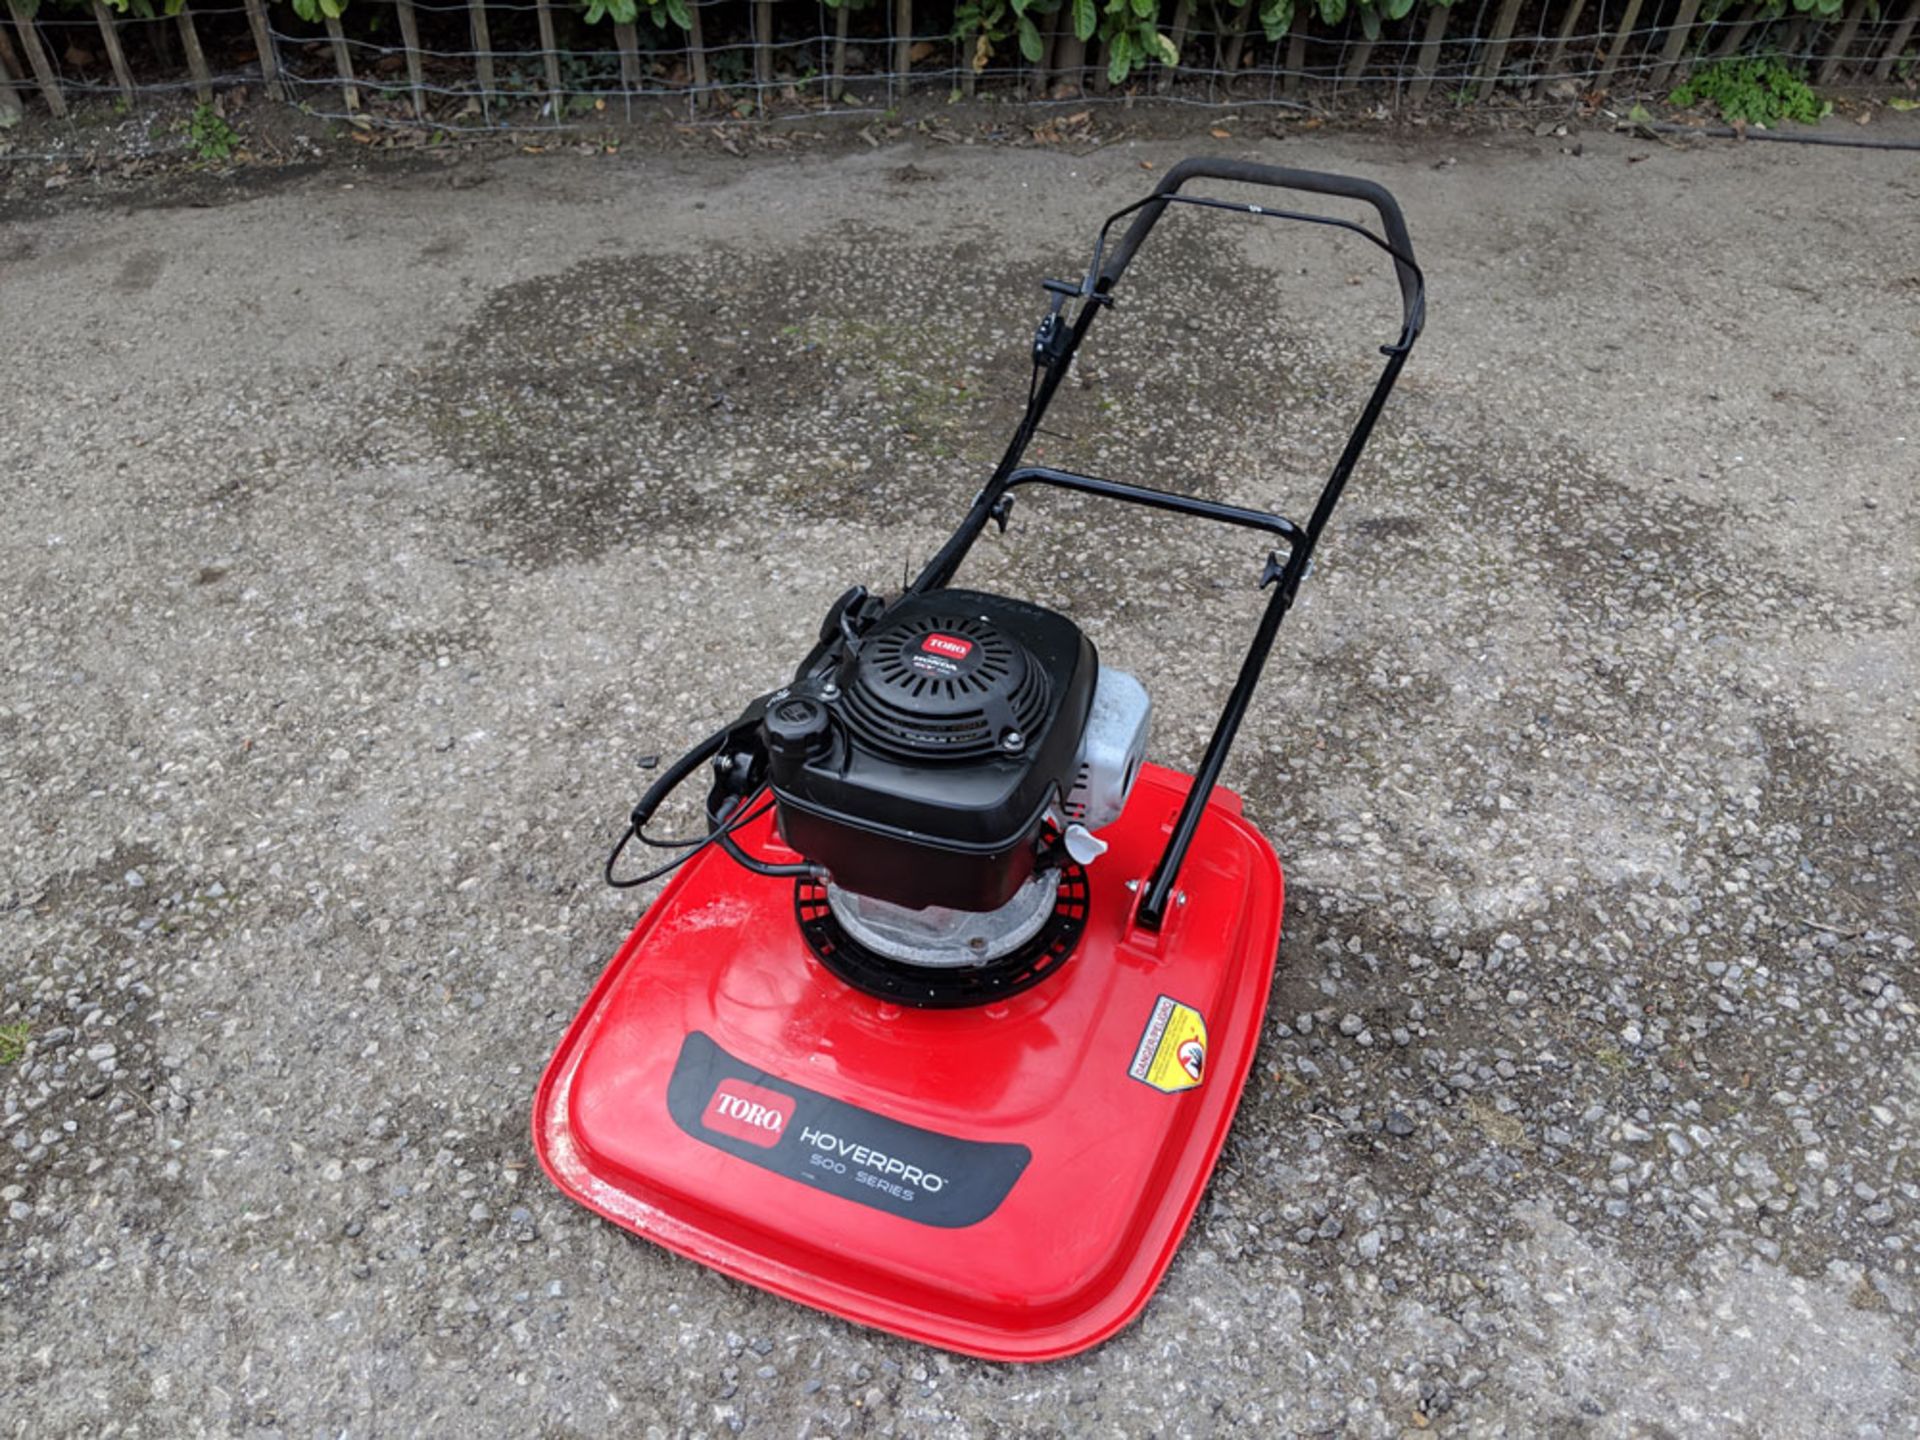 2011 Toro Hover Pro 500 Petrol Hover Mower - Image 5 of 5